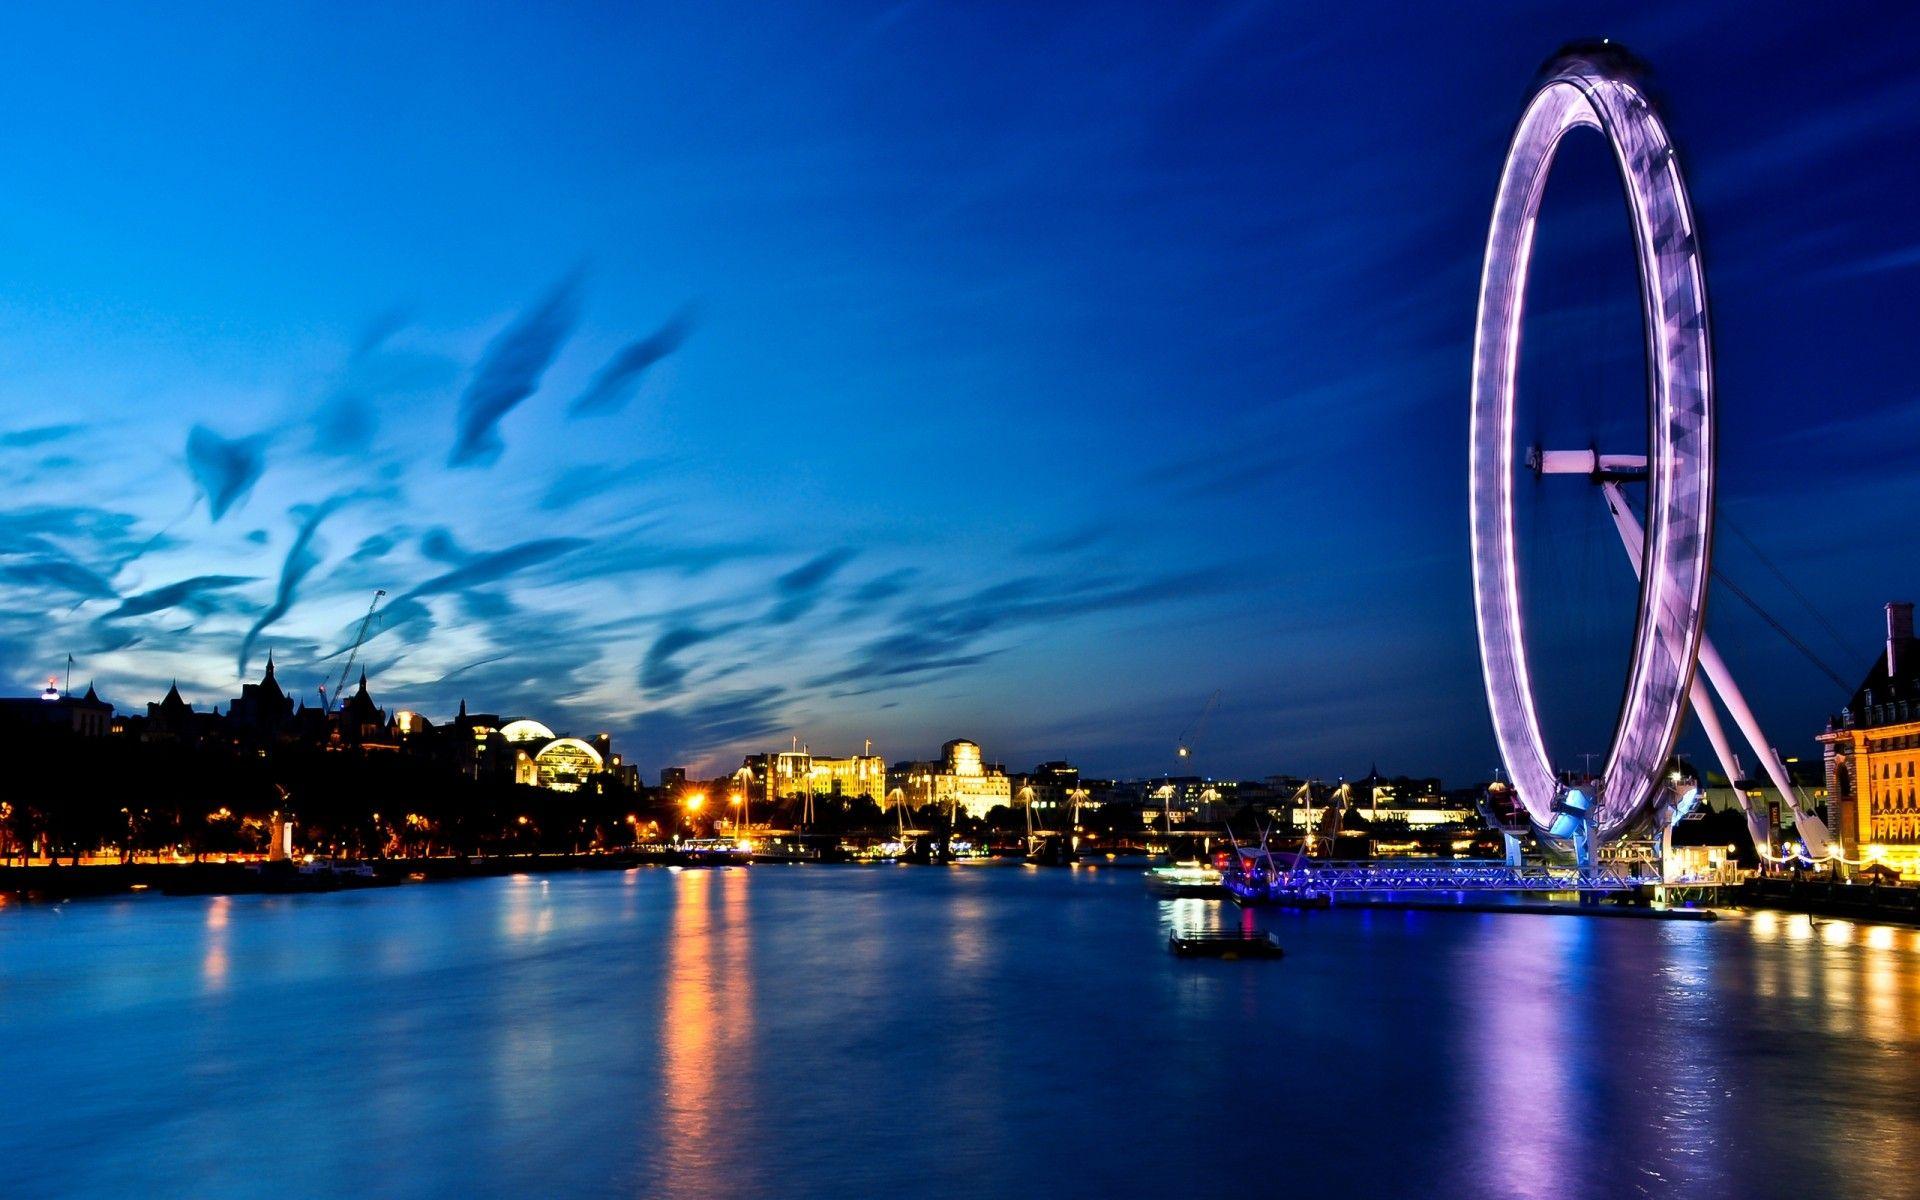 London Eye View. Android wallpaper for free